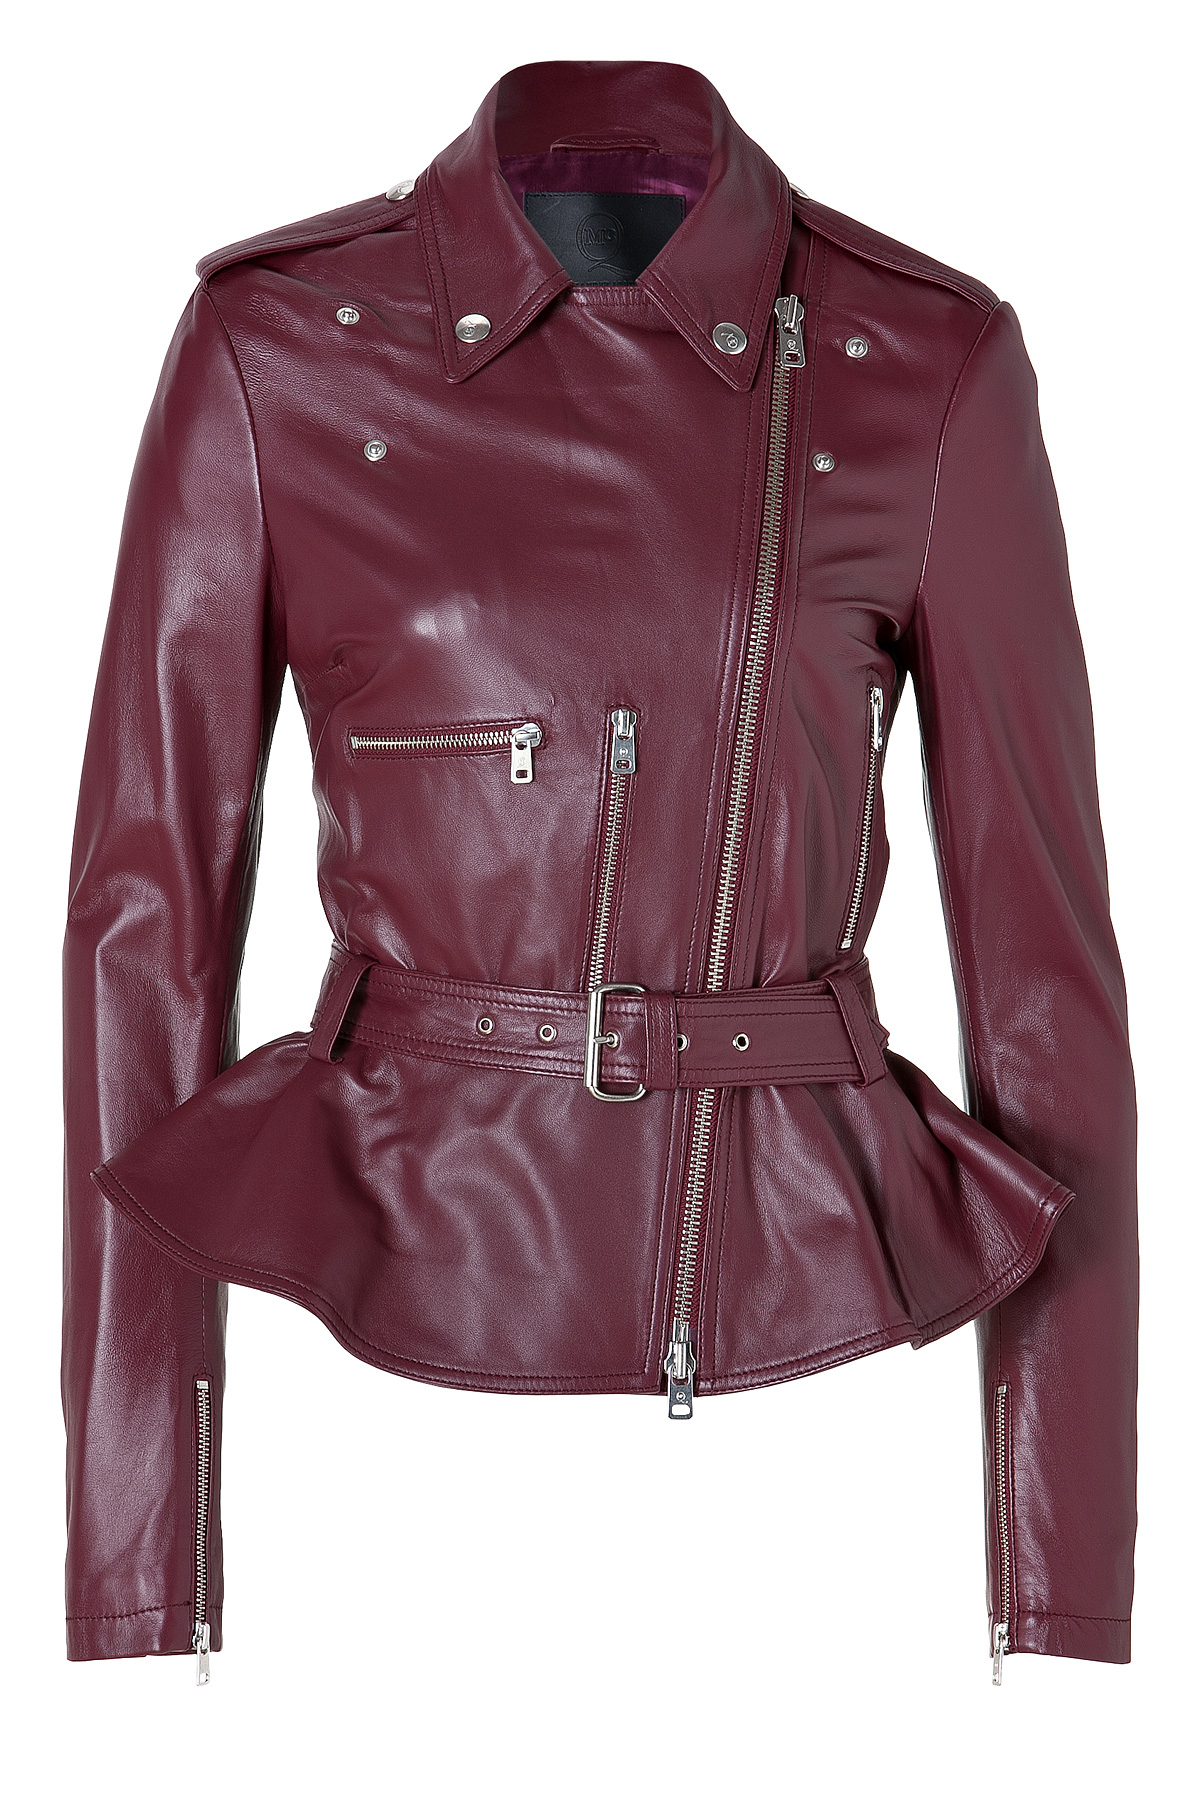 Lyst - Mcq Leather Jacket with Peplum in Oxblood in Red